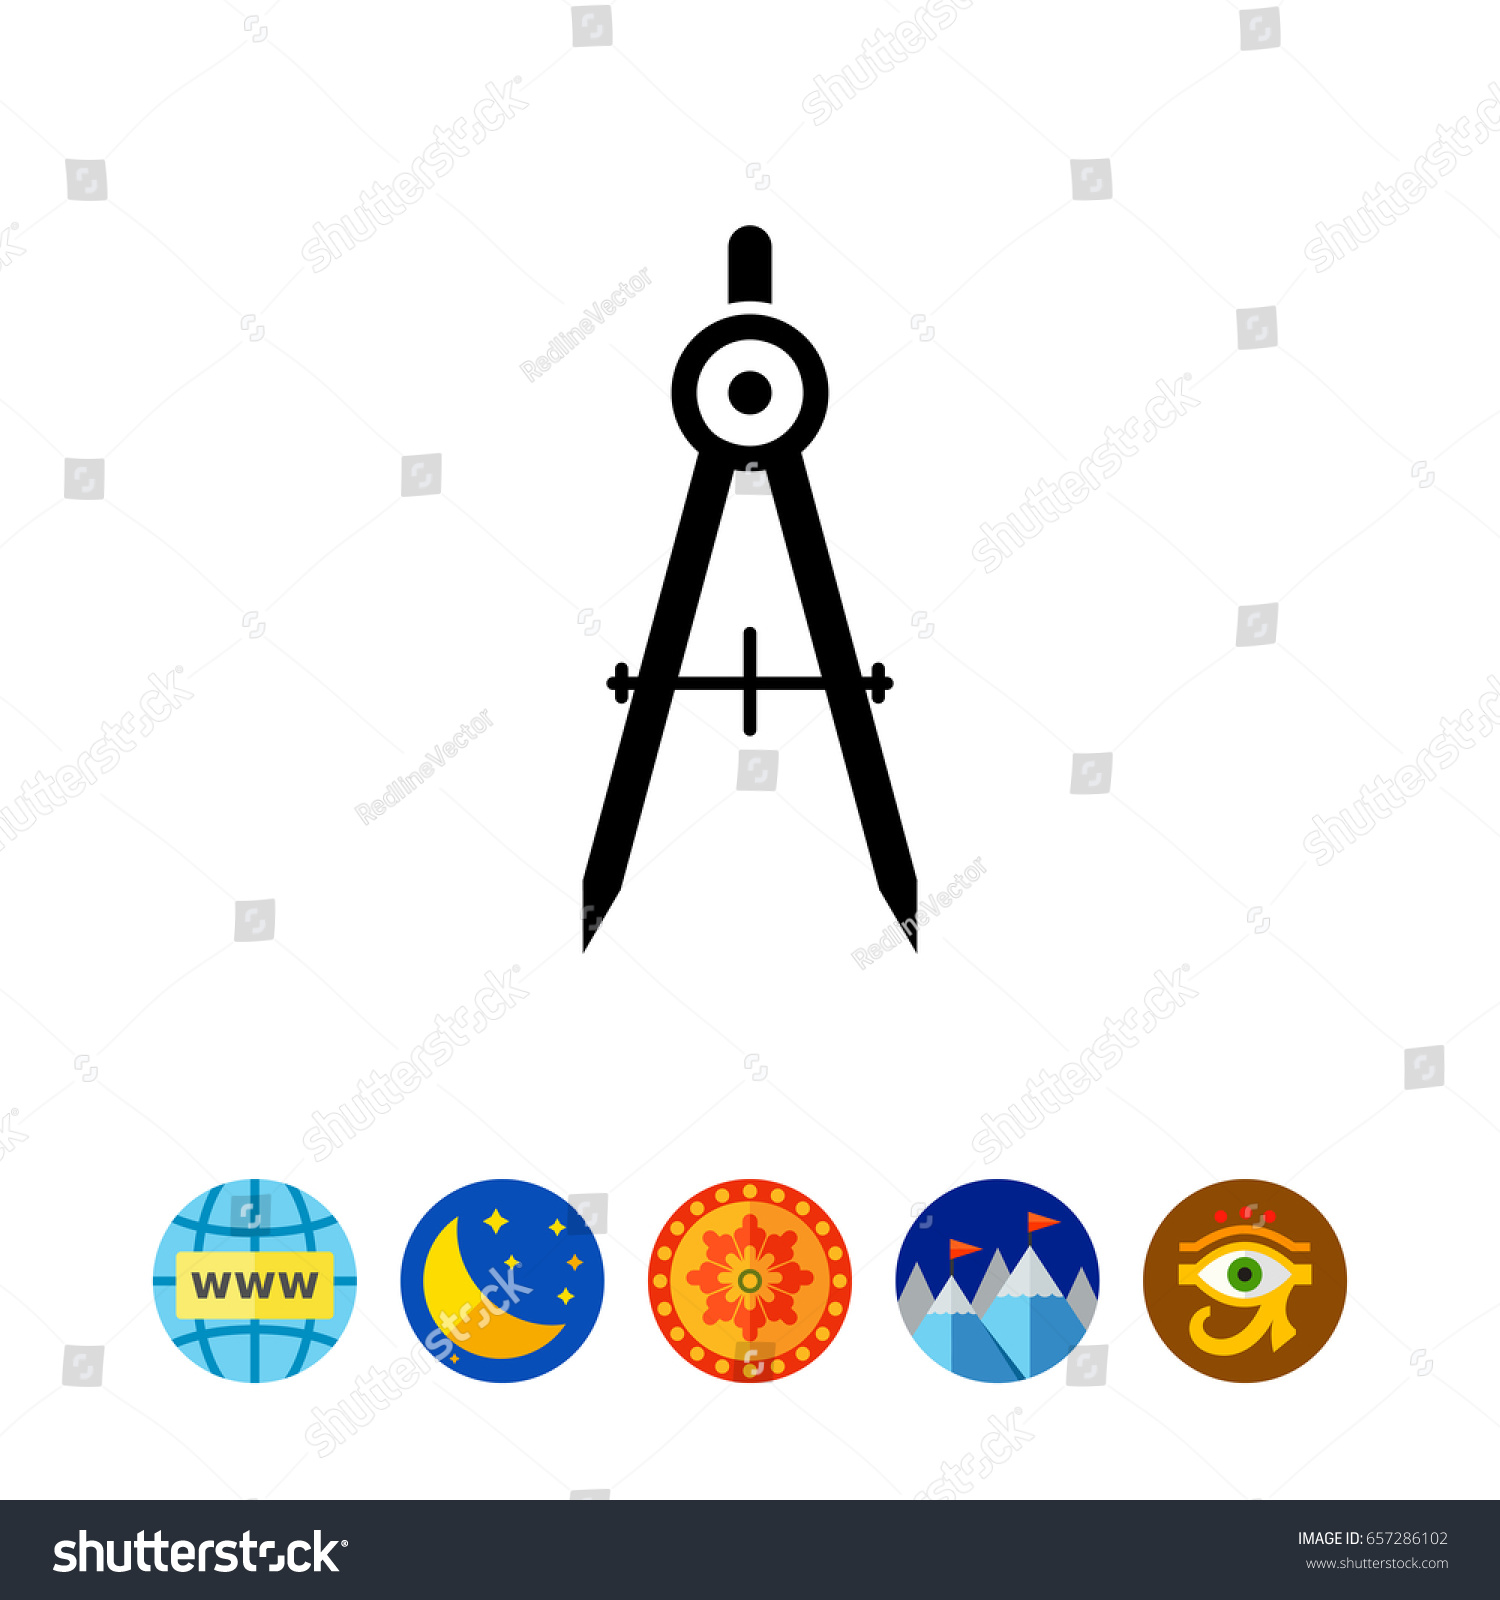 Drawing Compasses Stock Vector 657286102 - Shutterstock